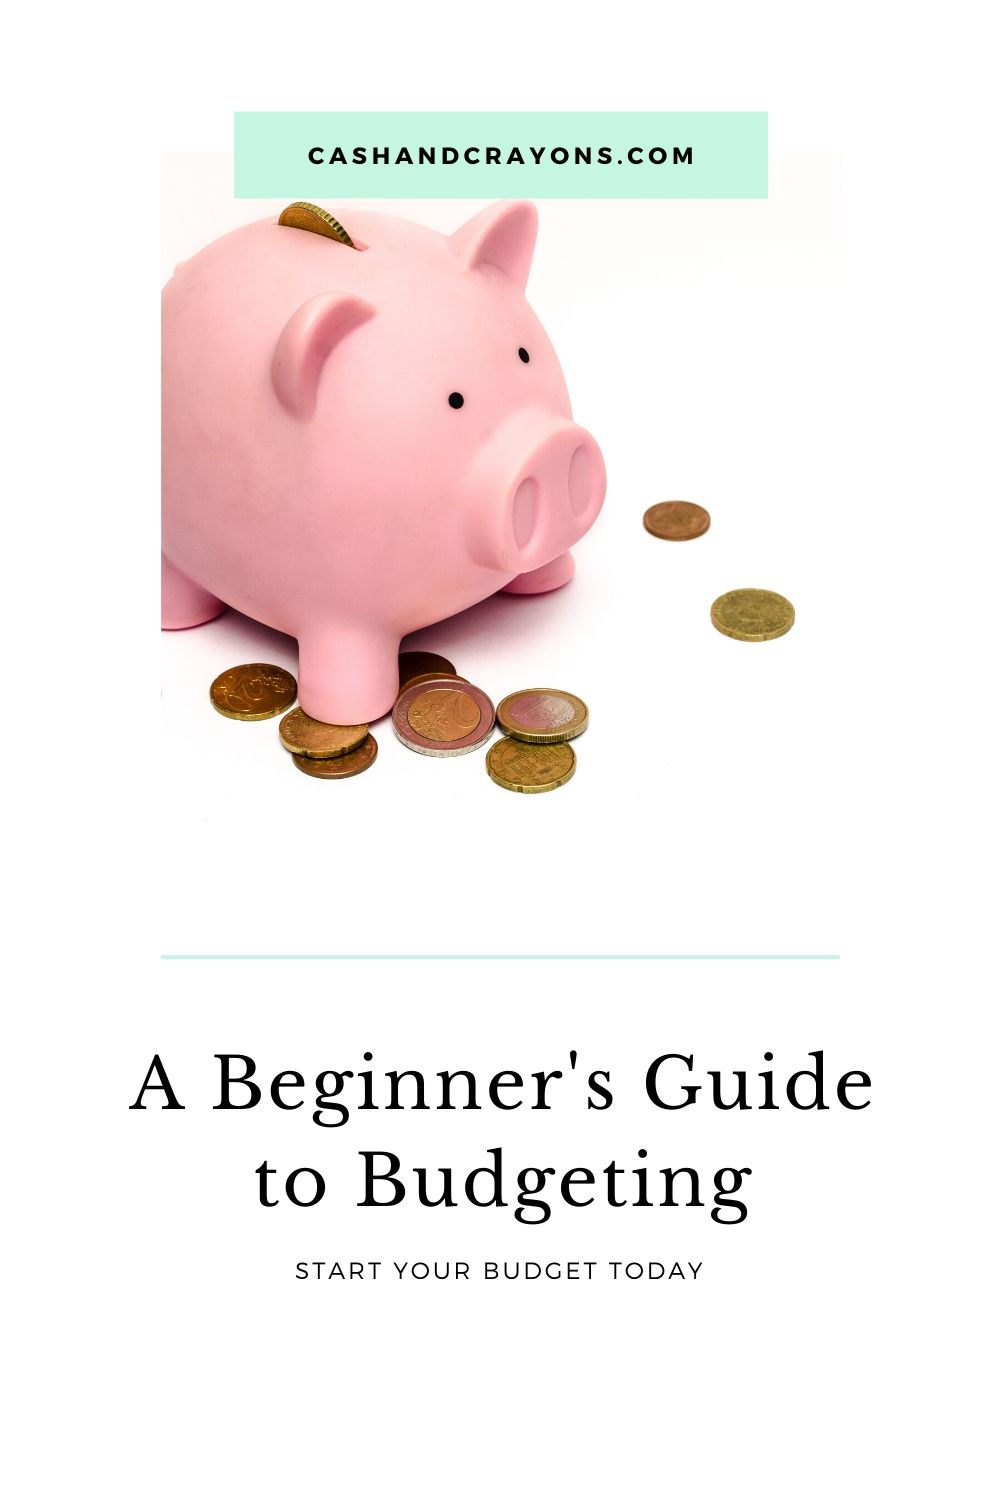 A Beginner’s Guide to Budgeting